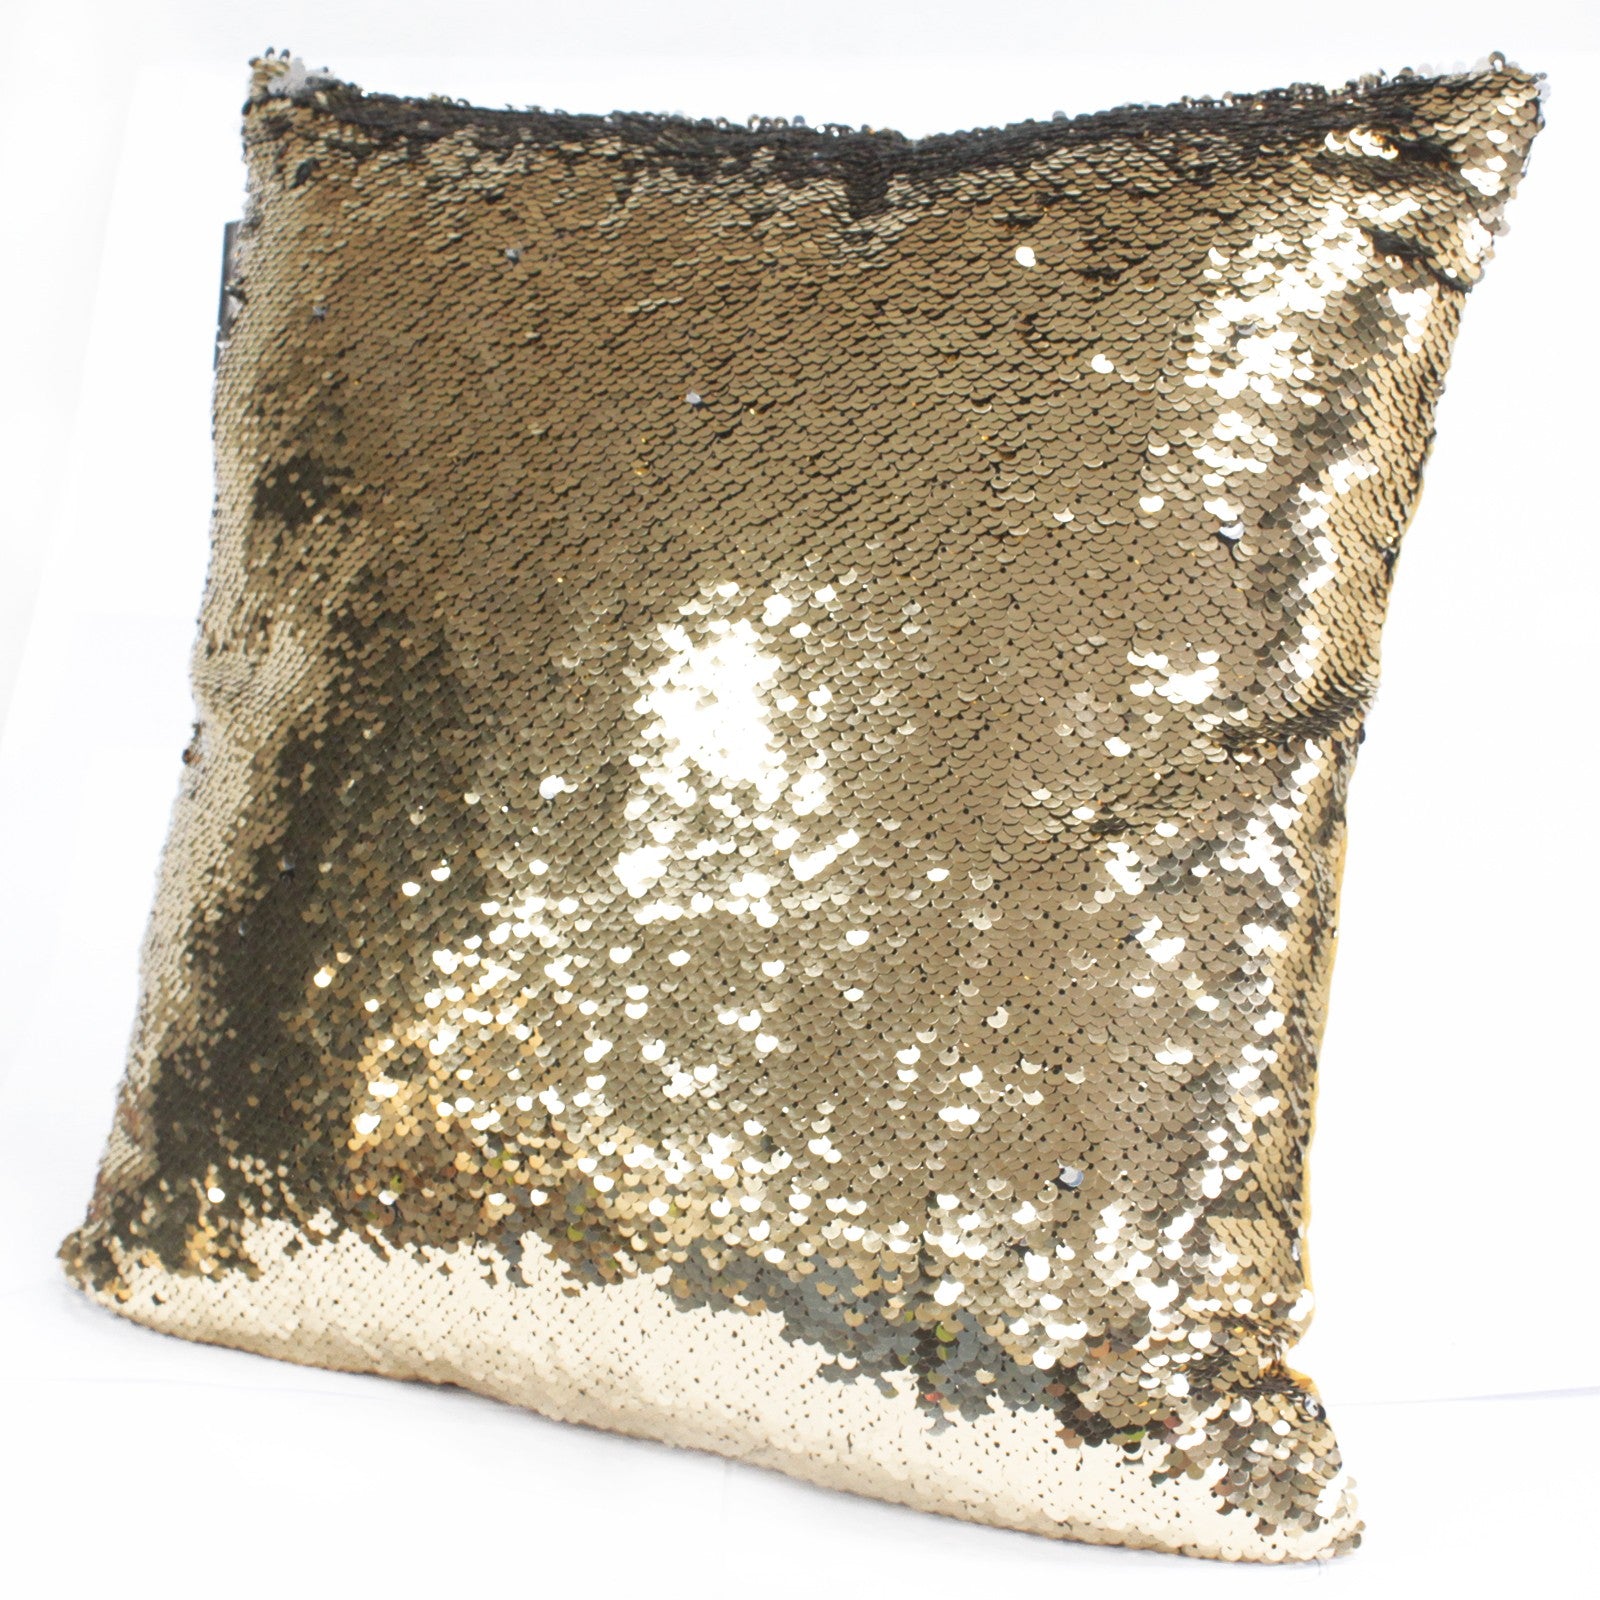 View Mermaid Cushion Covers Molten Gold Quicksilver information